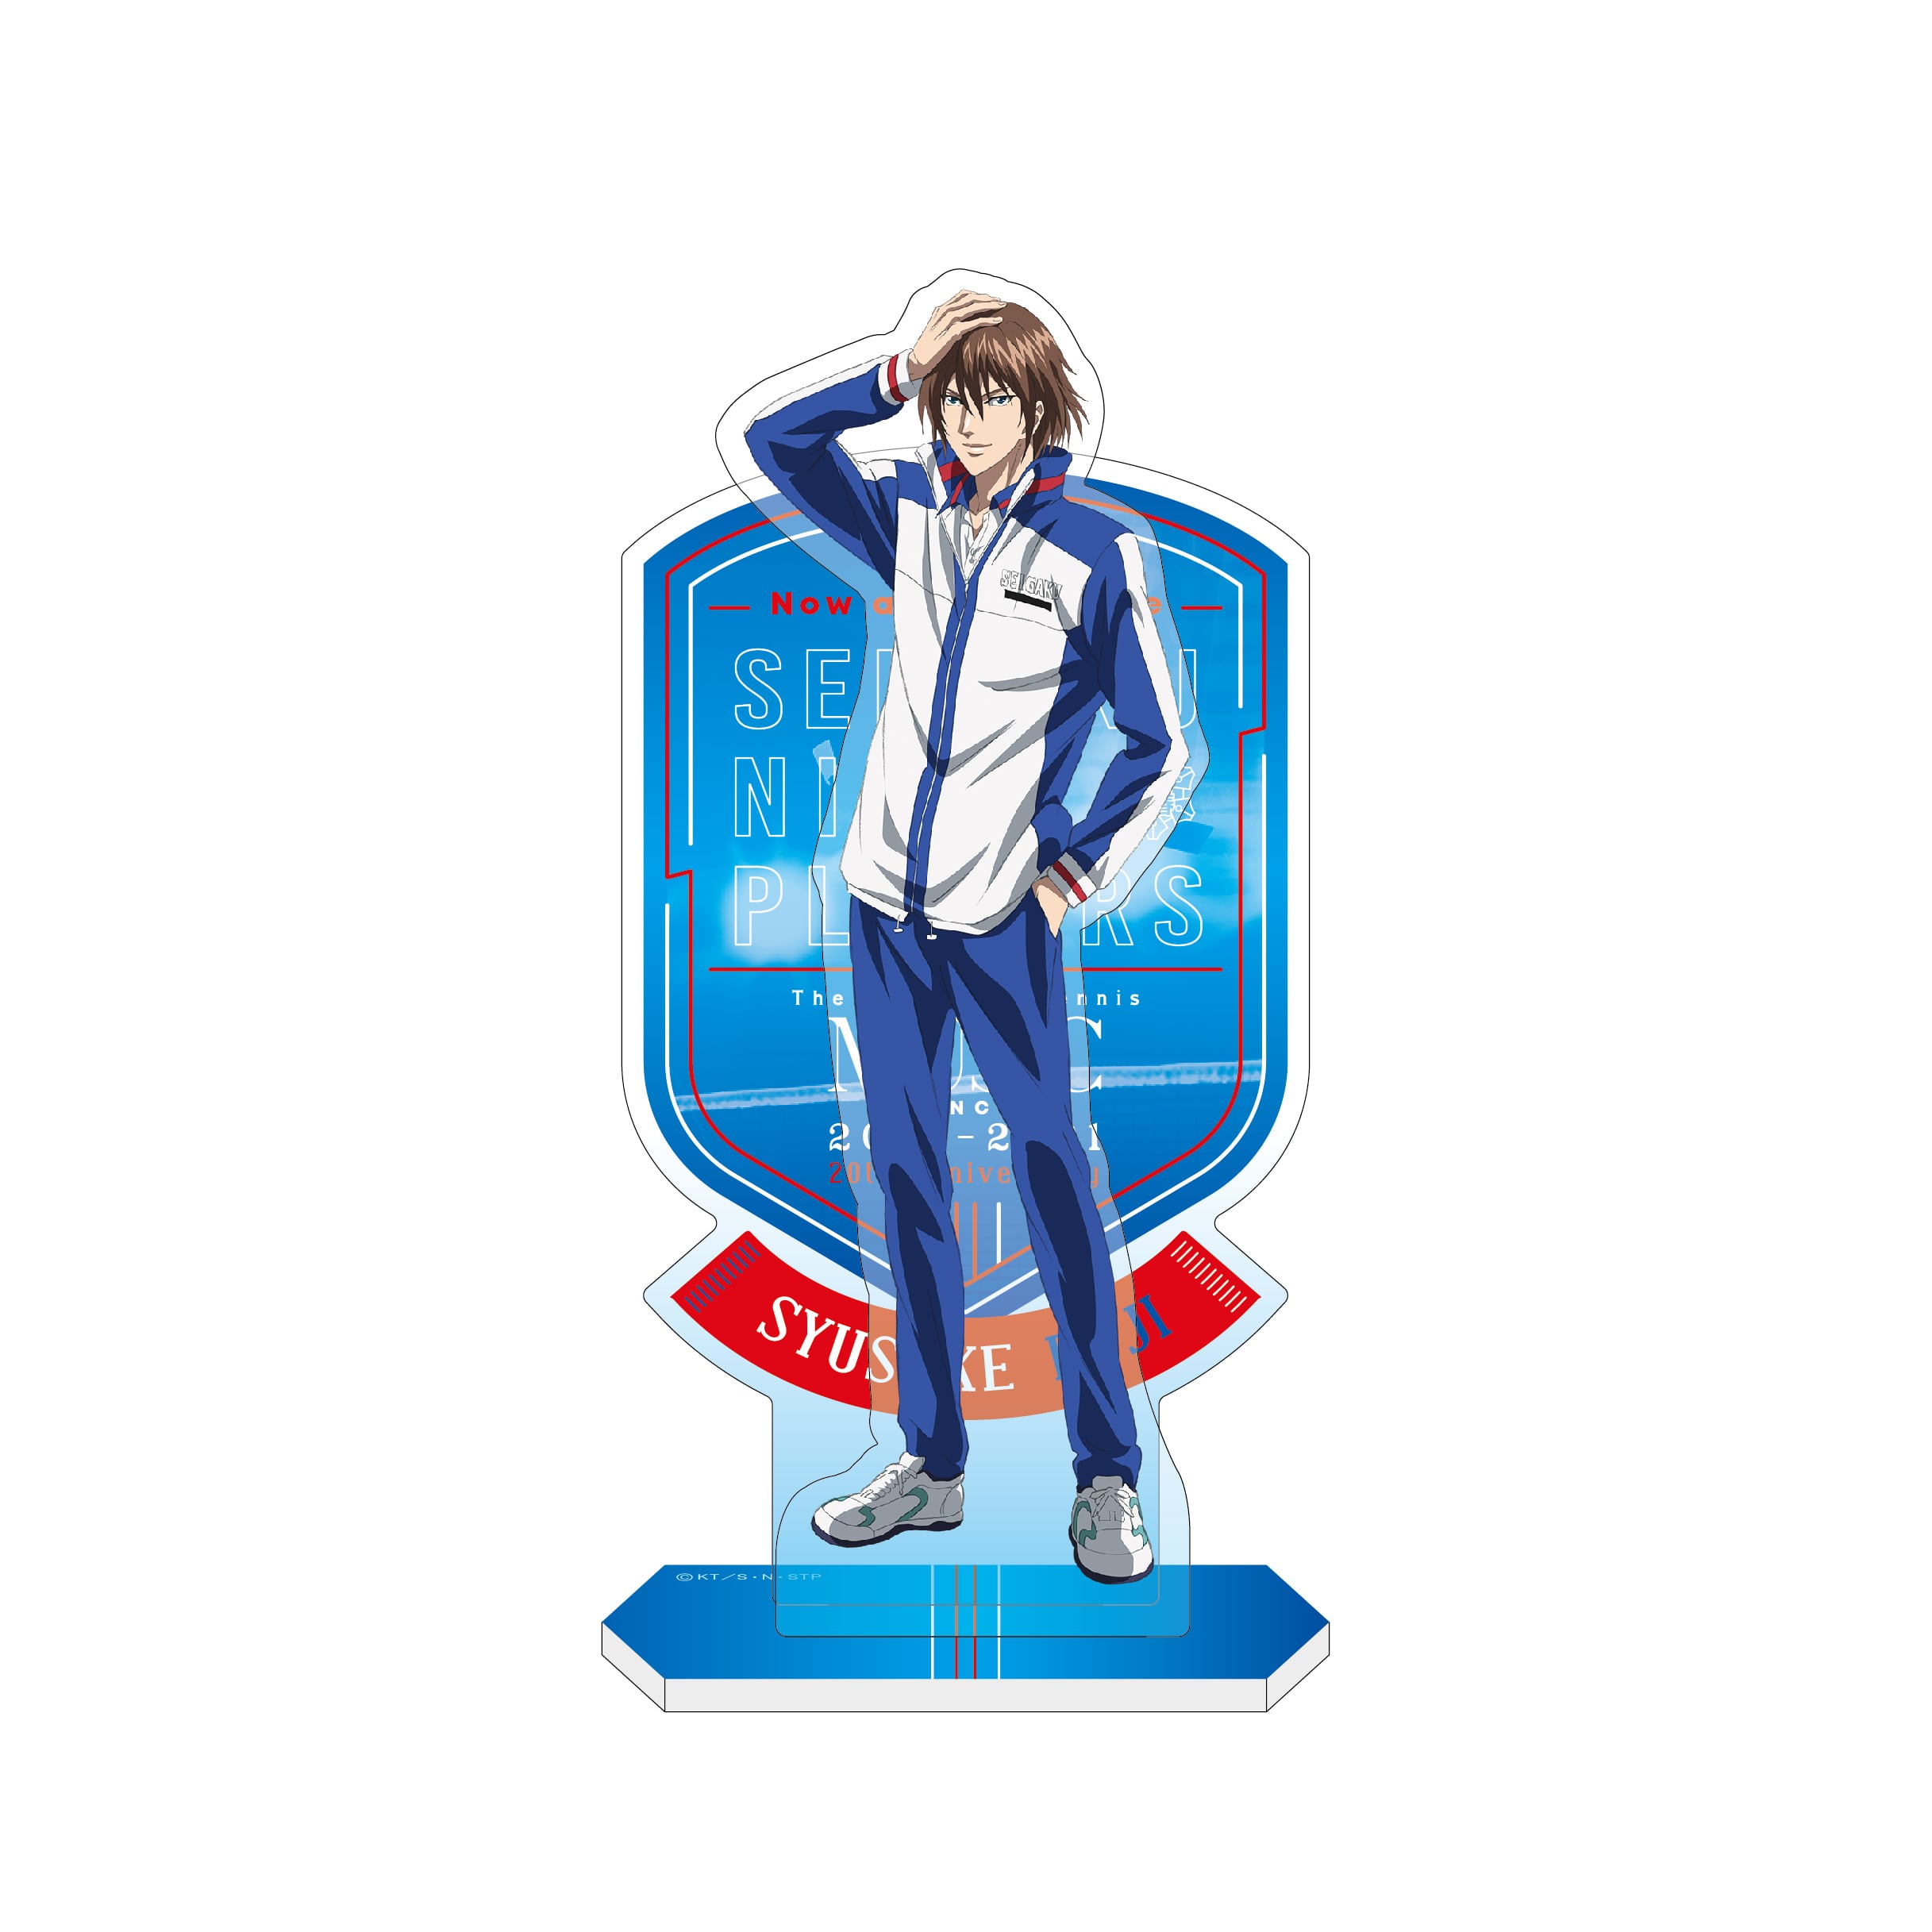 SEIGAKU NINE PLAYERS「Now and Evermore」キャラクターアクリルスタンド 不二周助